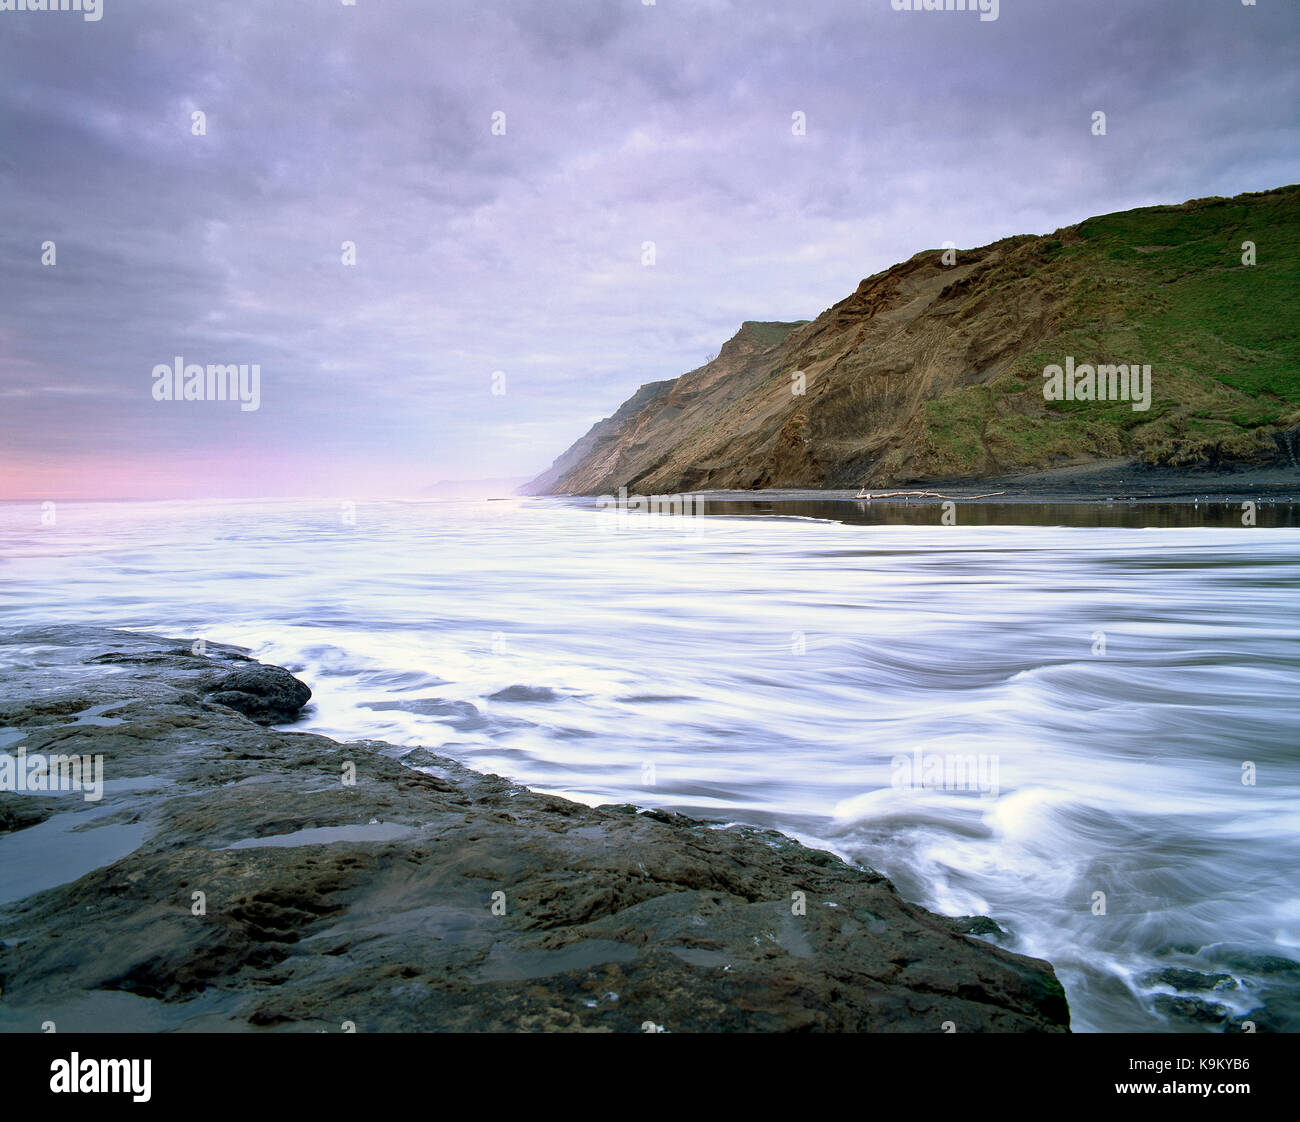 New Zealand. North Island. Auckland Region. West coast cliffs and tidal surge. Stock Photo